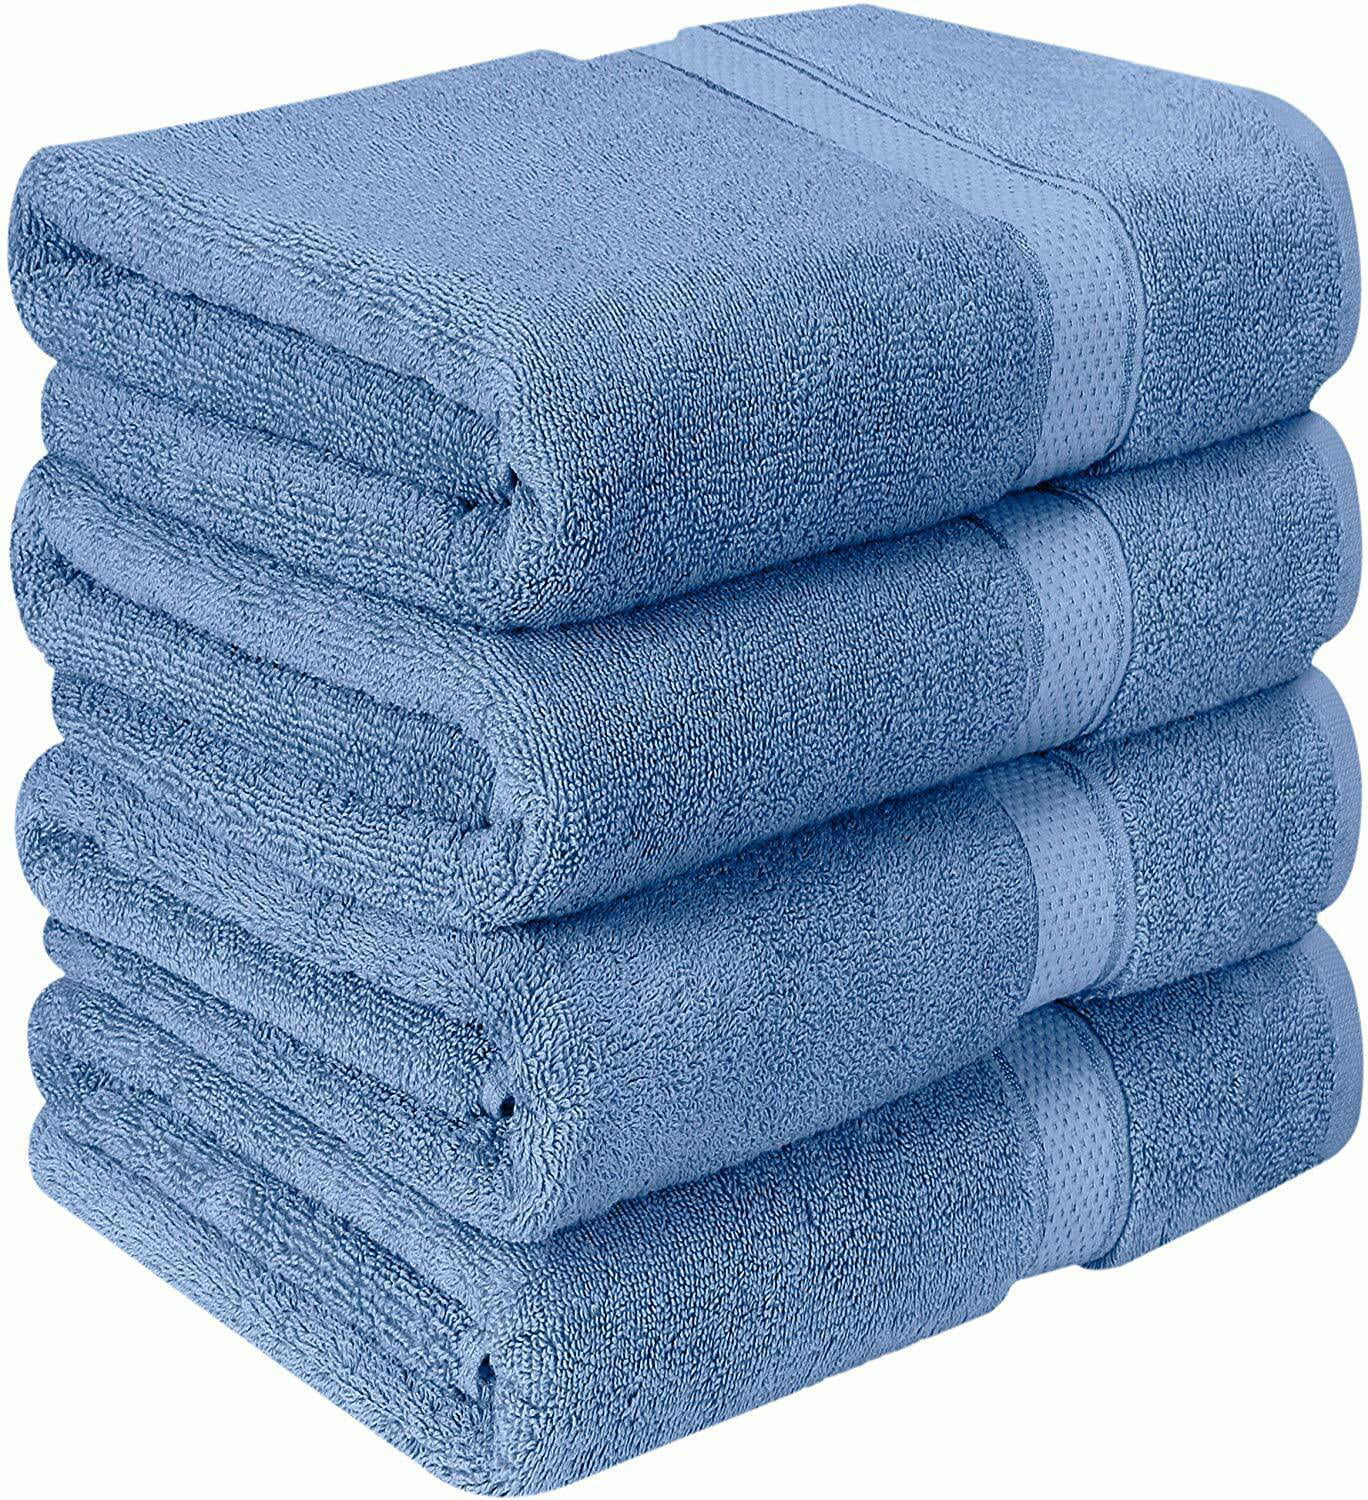 27 x 54 Inches, Turquoise Blue 4 Pieces Bath Towel 600 GSM Combed Cotton Bath Towel Sets Luxury Towels for Bathroom Soft Absorbent Towels